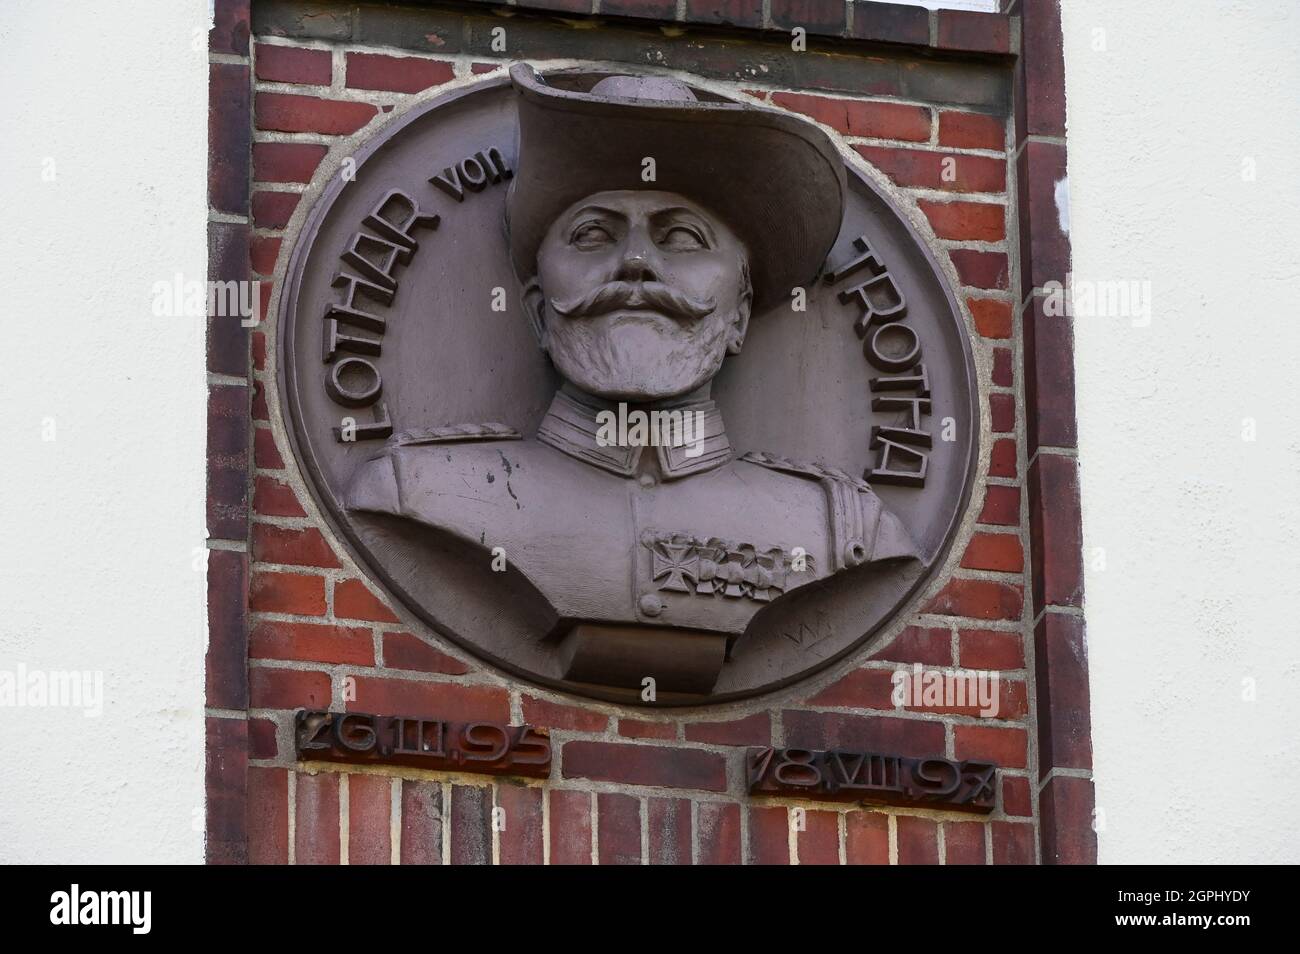 GERMANY, Hamburg, colonial German history, former Nazi Lettow-Vorbeck army barracks in Jenfeld , built 1936-38 during Hitler time, later used by Bundeswehr until 1999, bust of Lothar von Trotha, commander of the german colonial troops in Southwest Africa, today Namibia, he was responsible for the genocide of the Herero and Nama people Stock Photo